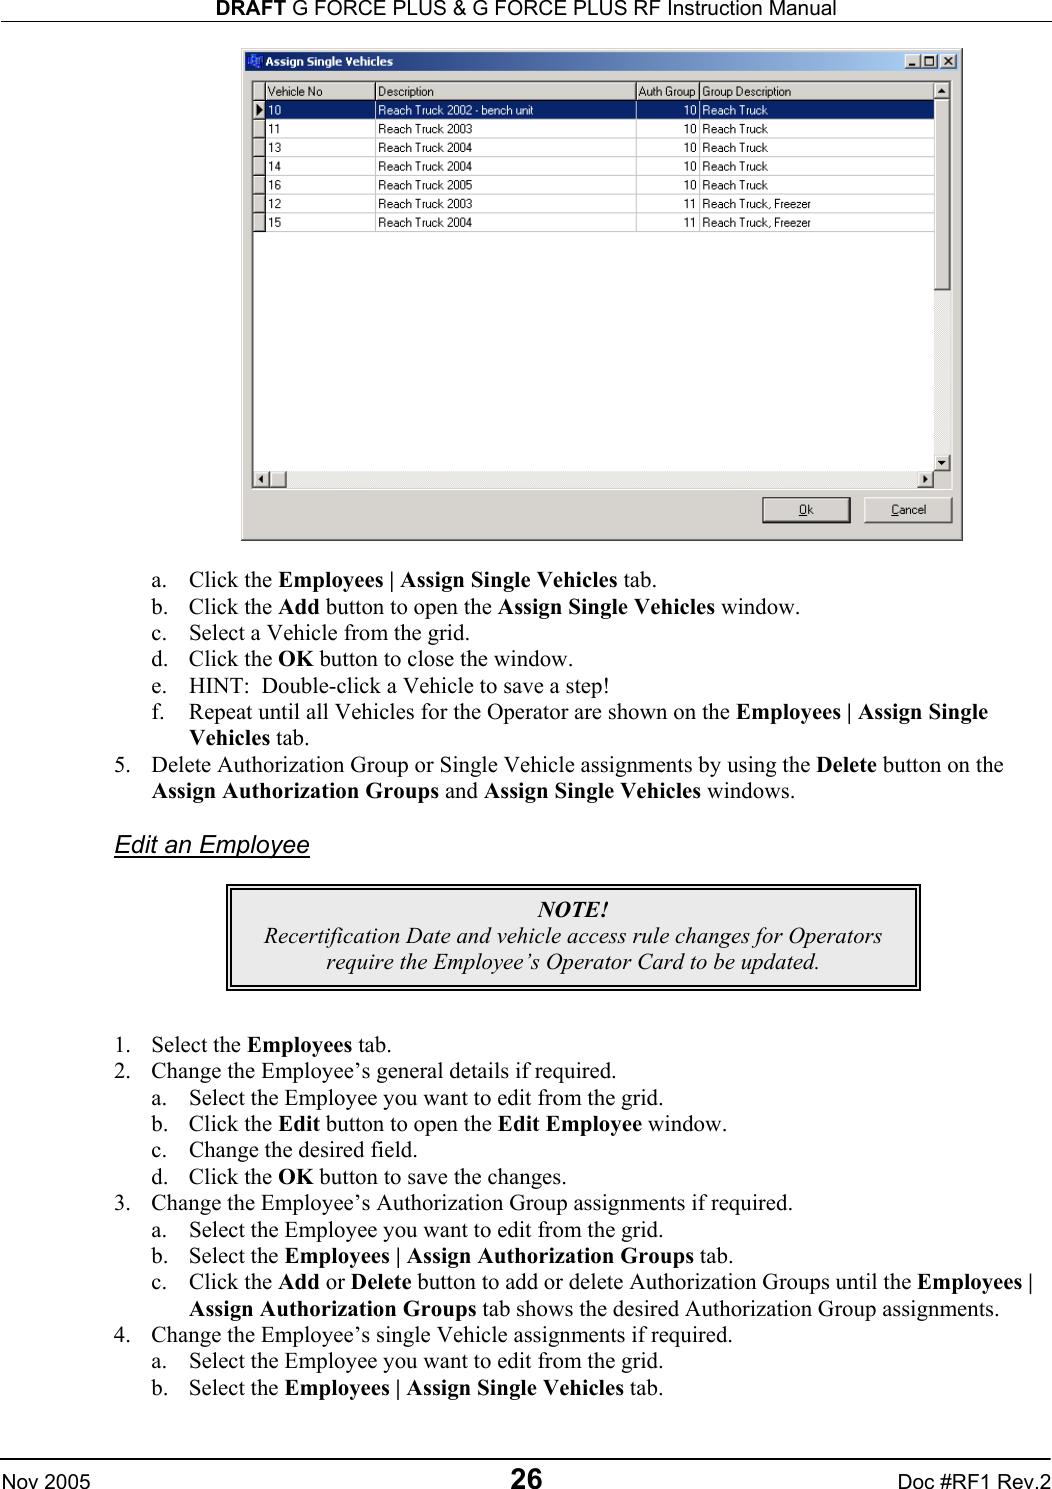 DRAFT G FORCE PLUS &amp; G FORCE PLUS RF Instruction Manual   Nov 2005 26 Doc #RF1 Rev.2   a. Click the Employees | Assign Single Vehicles tab. b. Click the Add button to open the Assign Single Vehicles window. c.  Select a Vehicle from the grid. d. Click the OK button to close the window. e.  HINT:  Double-click a Vehicle to save a step! f.  Repeat until all Vehicles for the Operator are shown on the Employees | Assign Single Vehicles tab. 5.  Delete Authorization Group or Single Vehicle assignments by using the Delete button on the Assign Authorization Groups and Assign Single Vehicles windows.  Edit an Employee       1. Select the Employees tab. 2.  Change the Employee’s general details if required. a.  Select the Employee you want to edit from the grid. b. Click the Edit button to open the Edit Employee window. c.  Change the desired field. d. Click the OK button to save the changes. 3.  Change the Employee’s Authorization Group assignments if required. a.  Select the Employee you want to edit from the grid. b. Select the Employees | Assign Authorization Groups tab. c. Click the Add or Delete button to add or delete Authorization Groups until the Employees | Assign Authorization Groups tab shows the desired Authorization Group assignments. 4.  Change the Employee’s single Vehicle assignments if required. a.  Select the Employee you want to edit from the grid. b. Select the Employees | Assign Single Vehicles tab. NOTE! Recertification Date and vehicle access rule changes for Operators require the Employee’s Operator Card to be updated. 